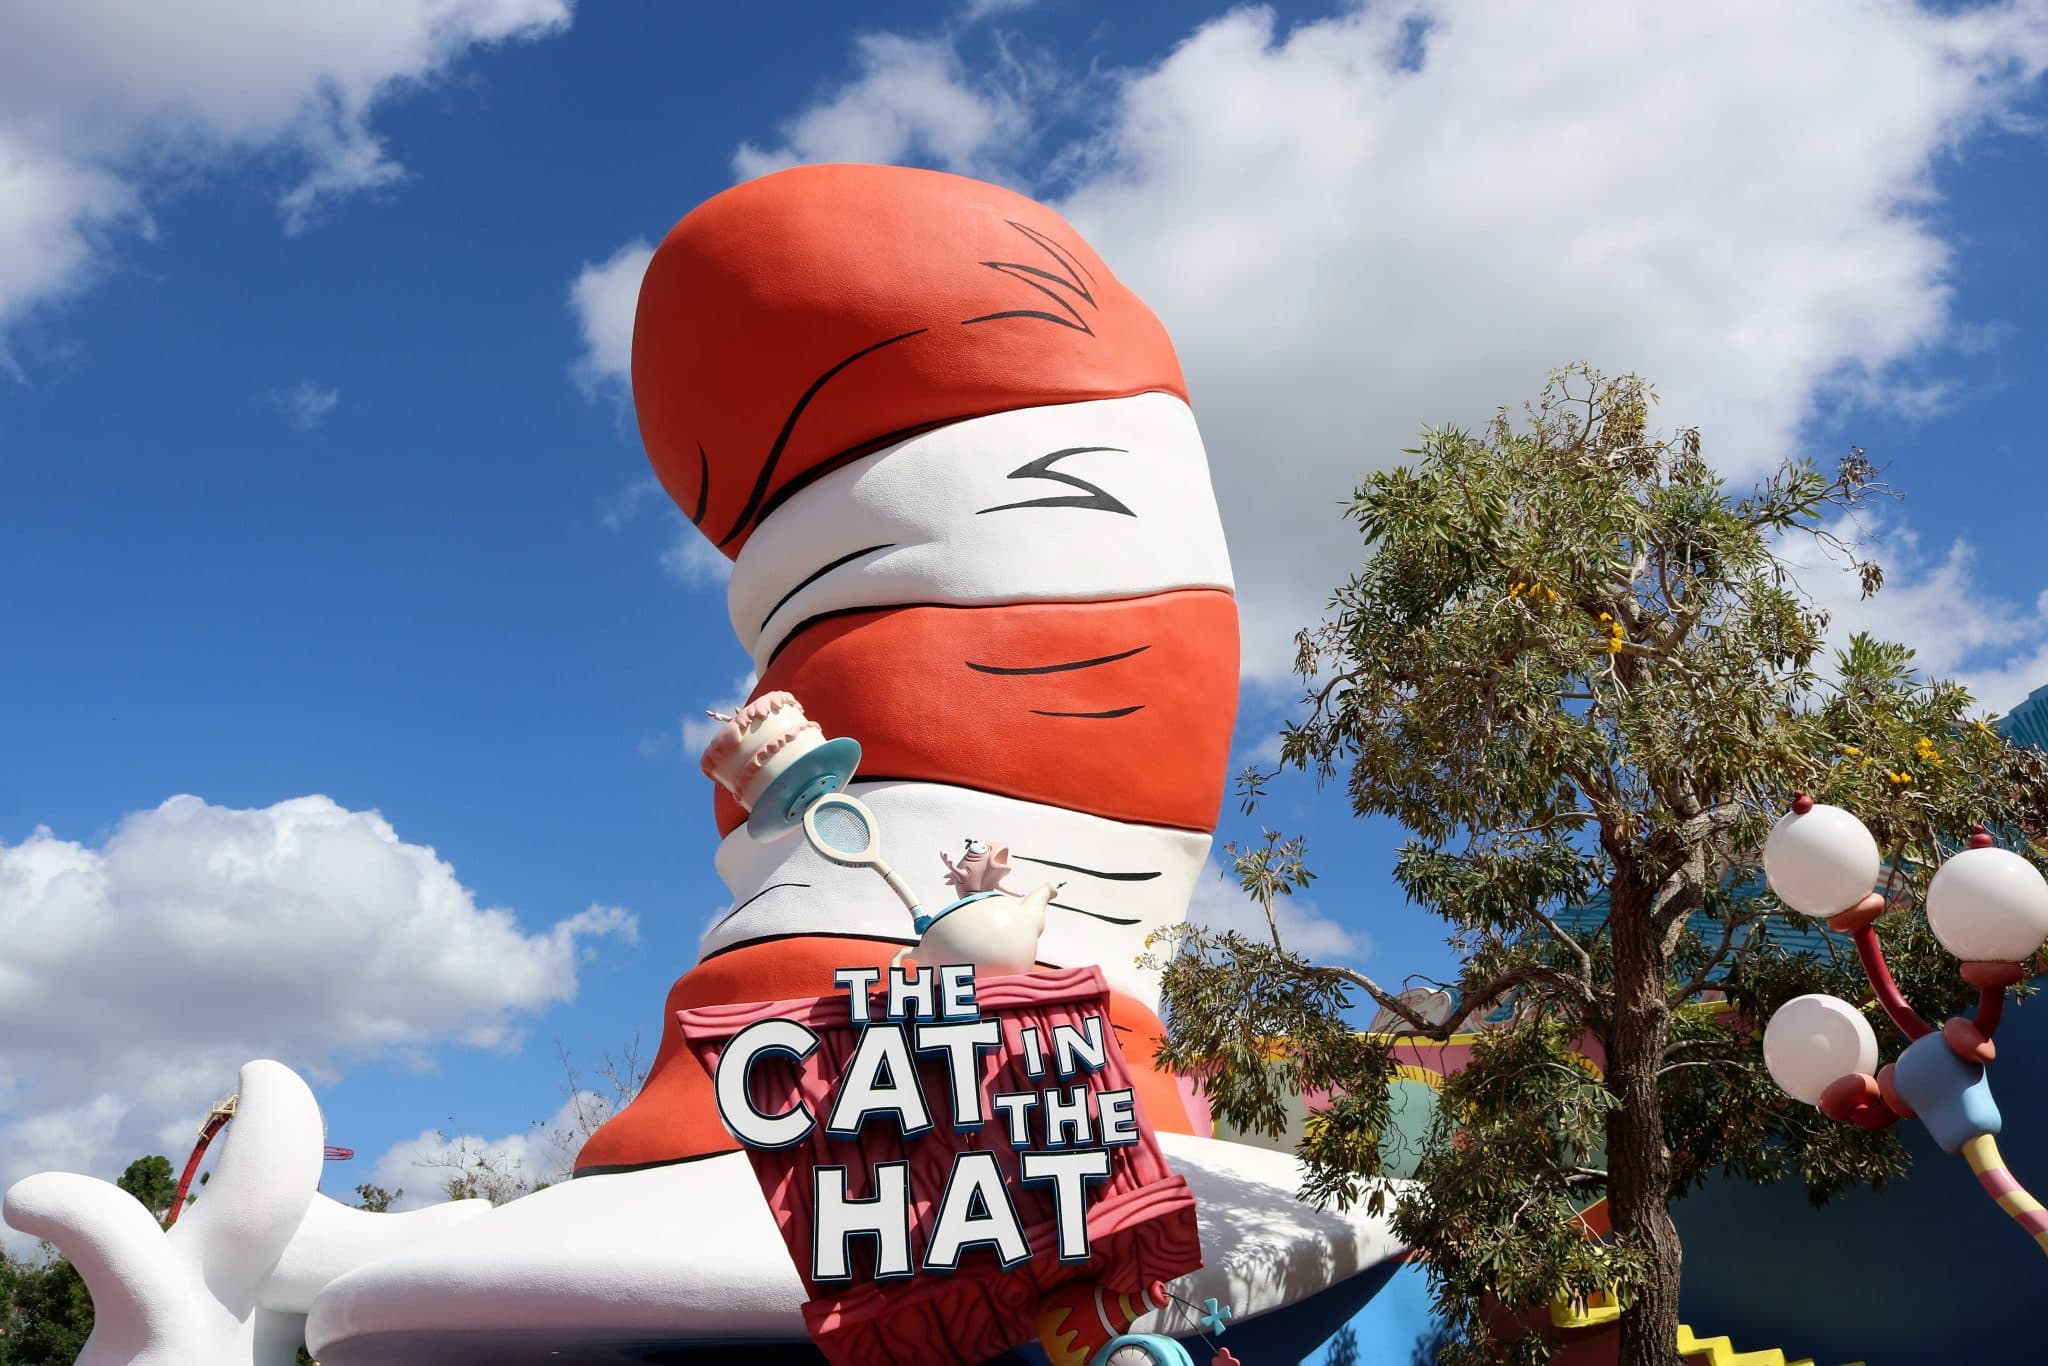 The Cat in the Hat ride